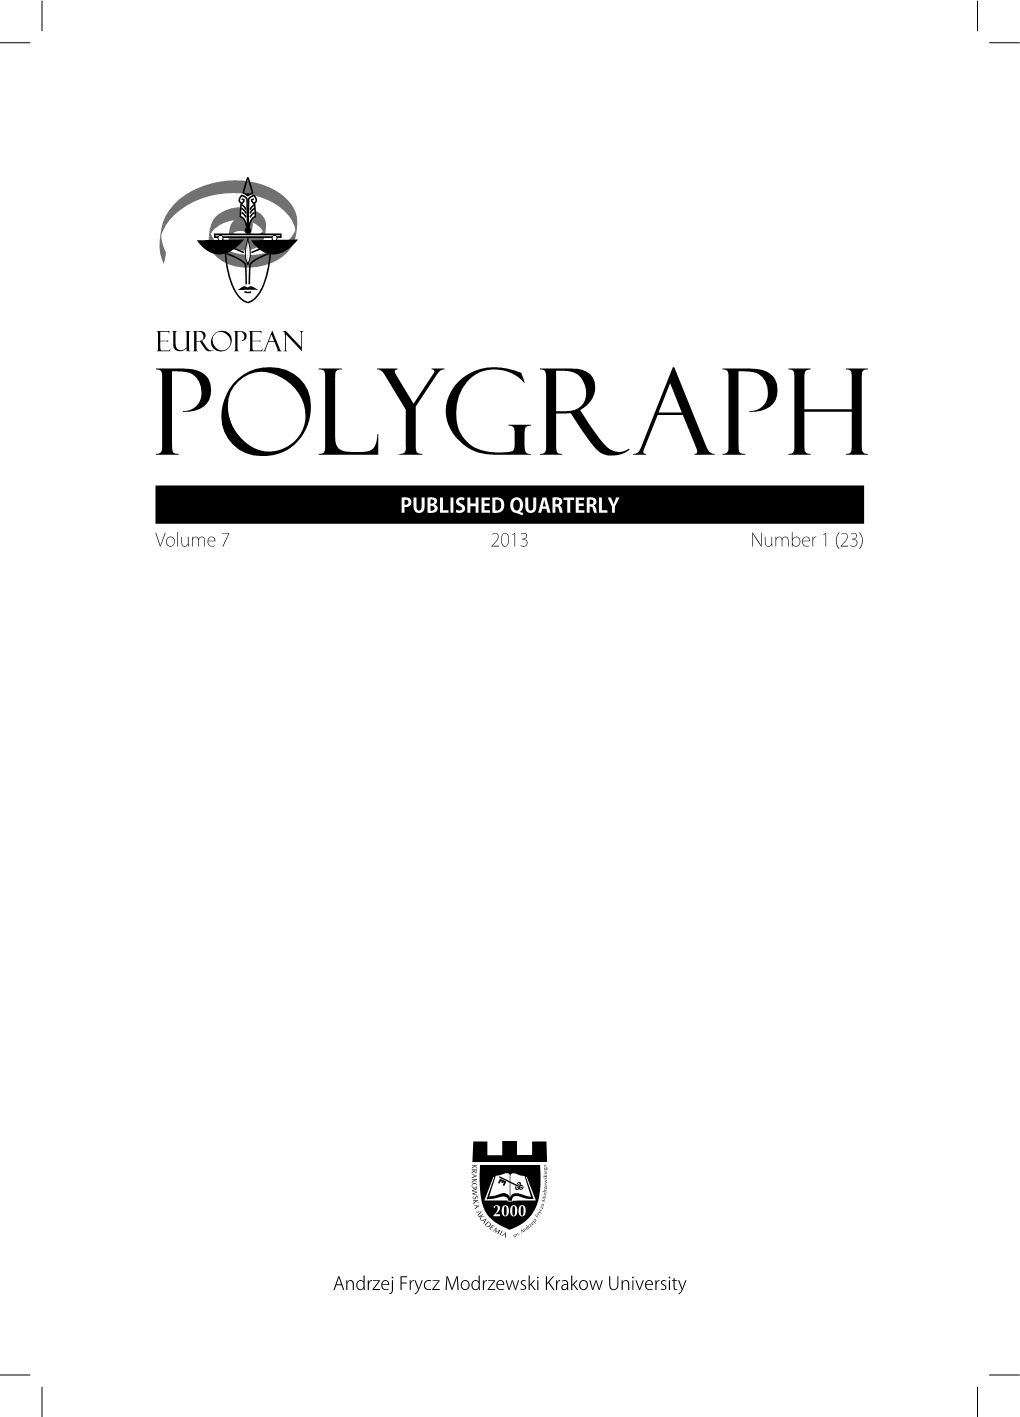 Use of Polygraph in Ukraine Cover Image